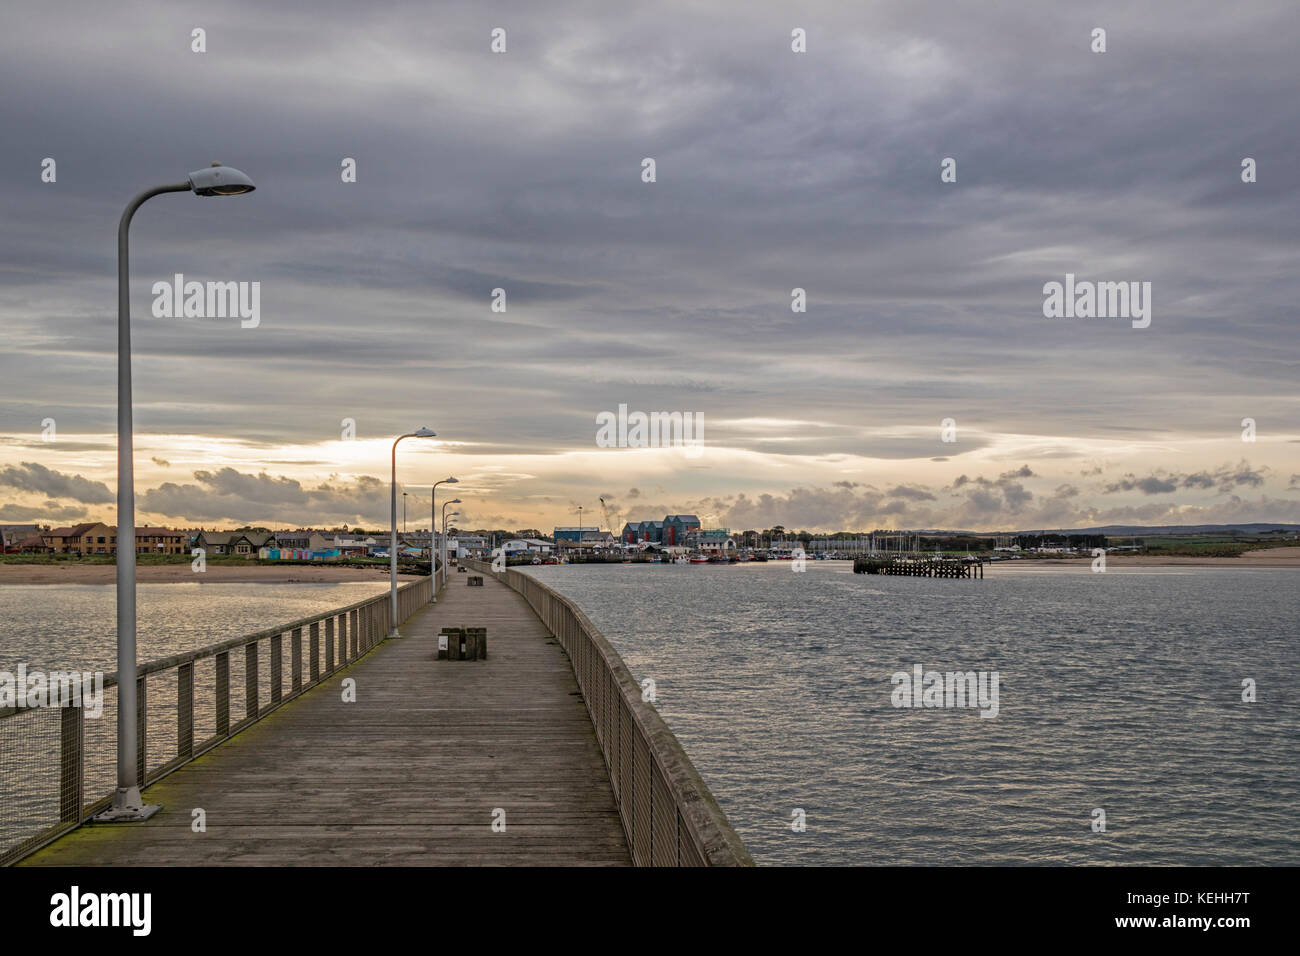 Looking towards the coastal town of Amble from Amble Pier, Northumberland, UK Stock Photo